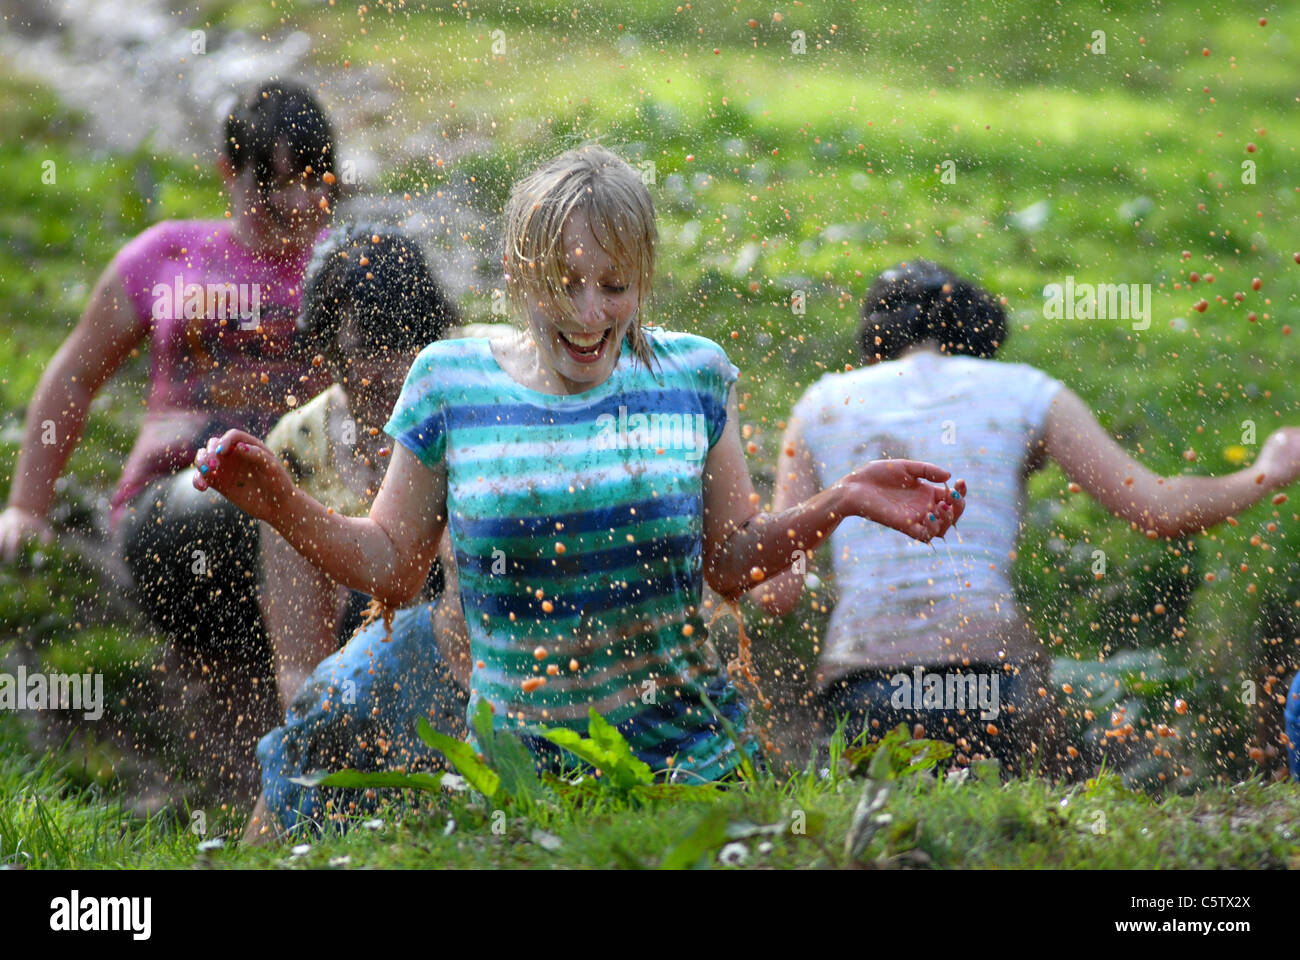 Getting splashed with water. Stock Photo